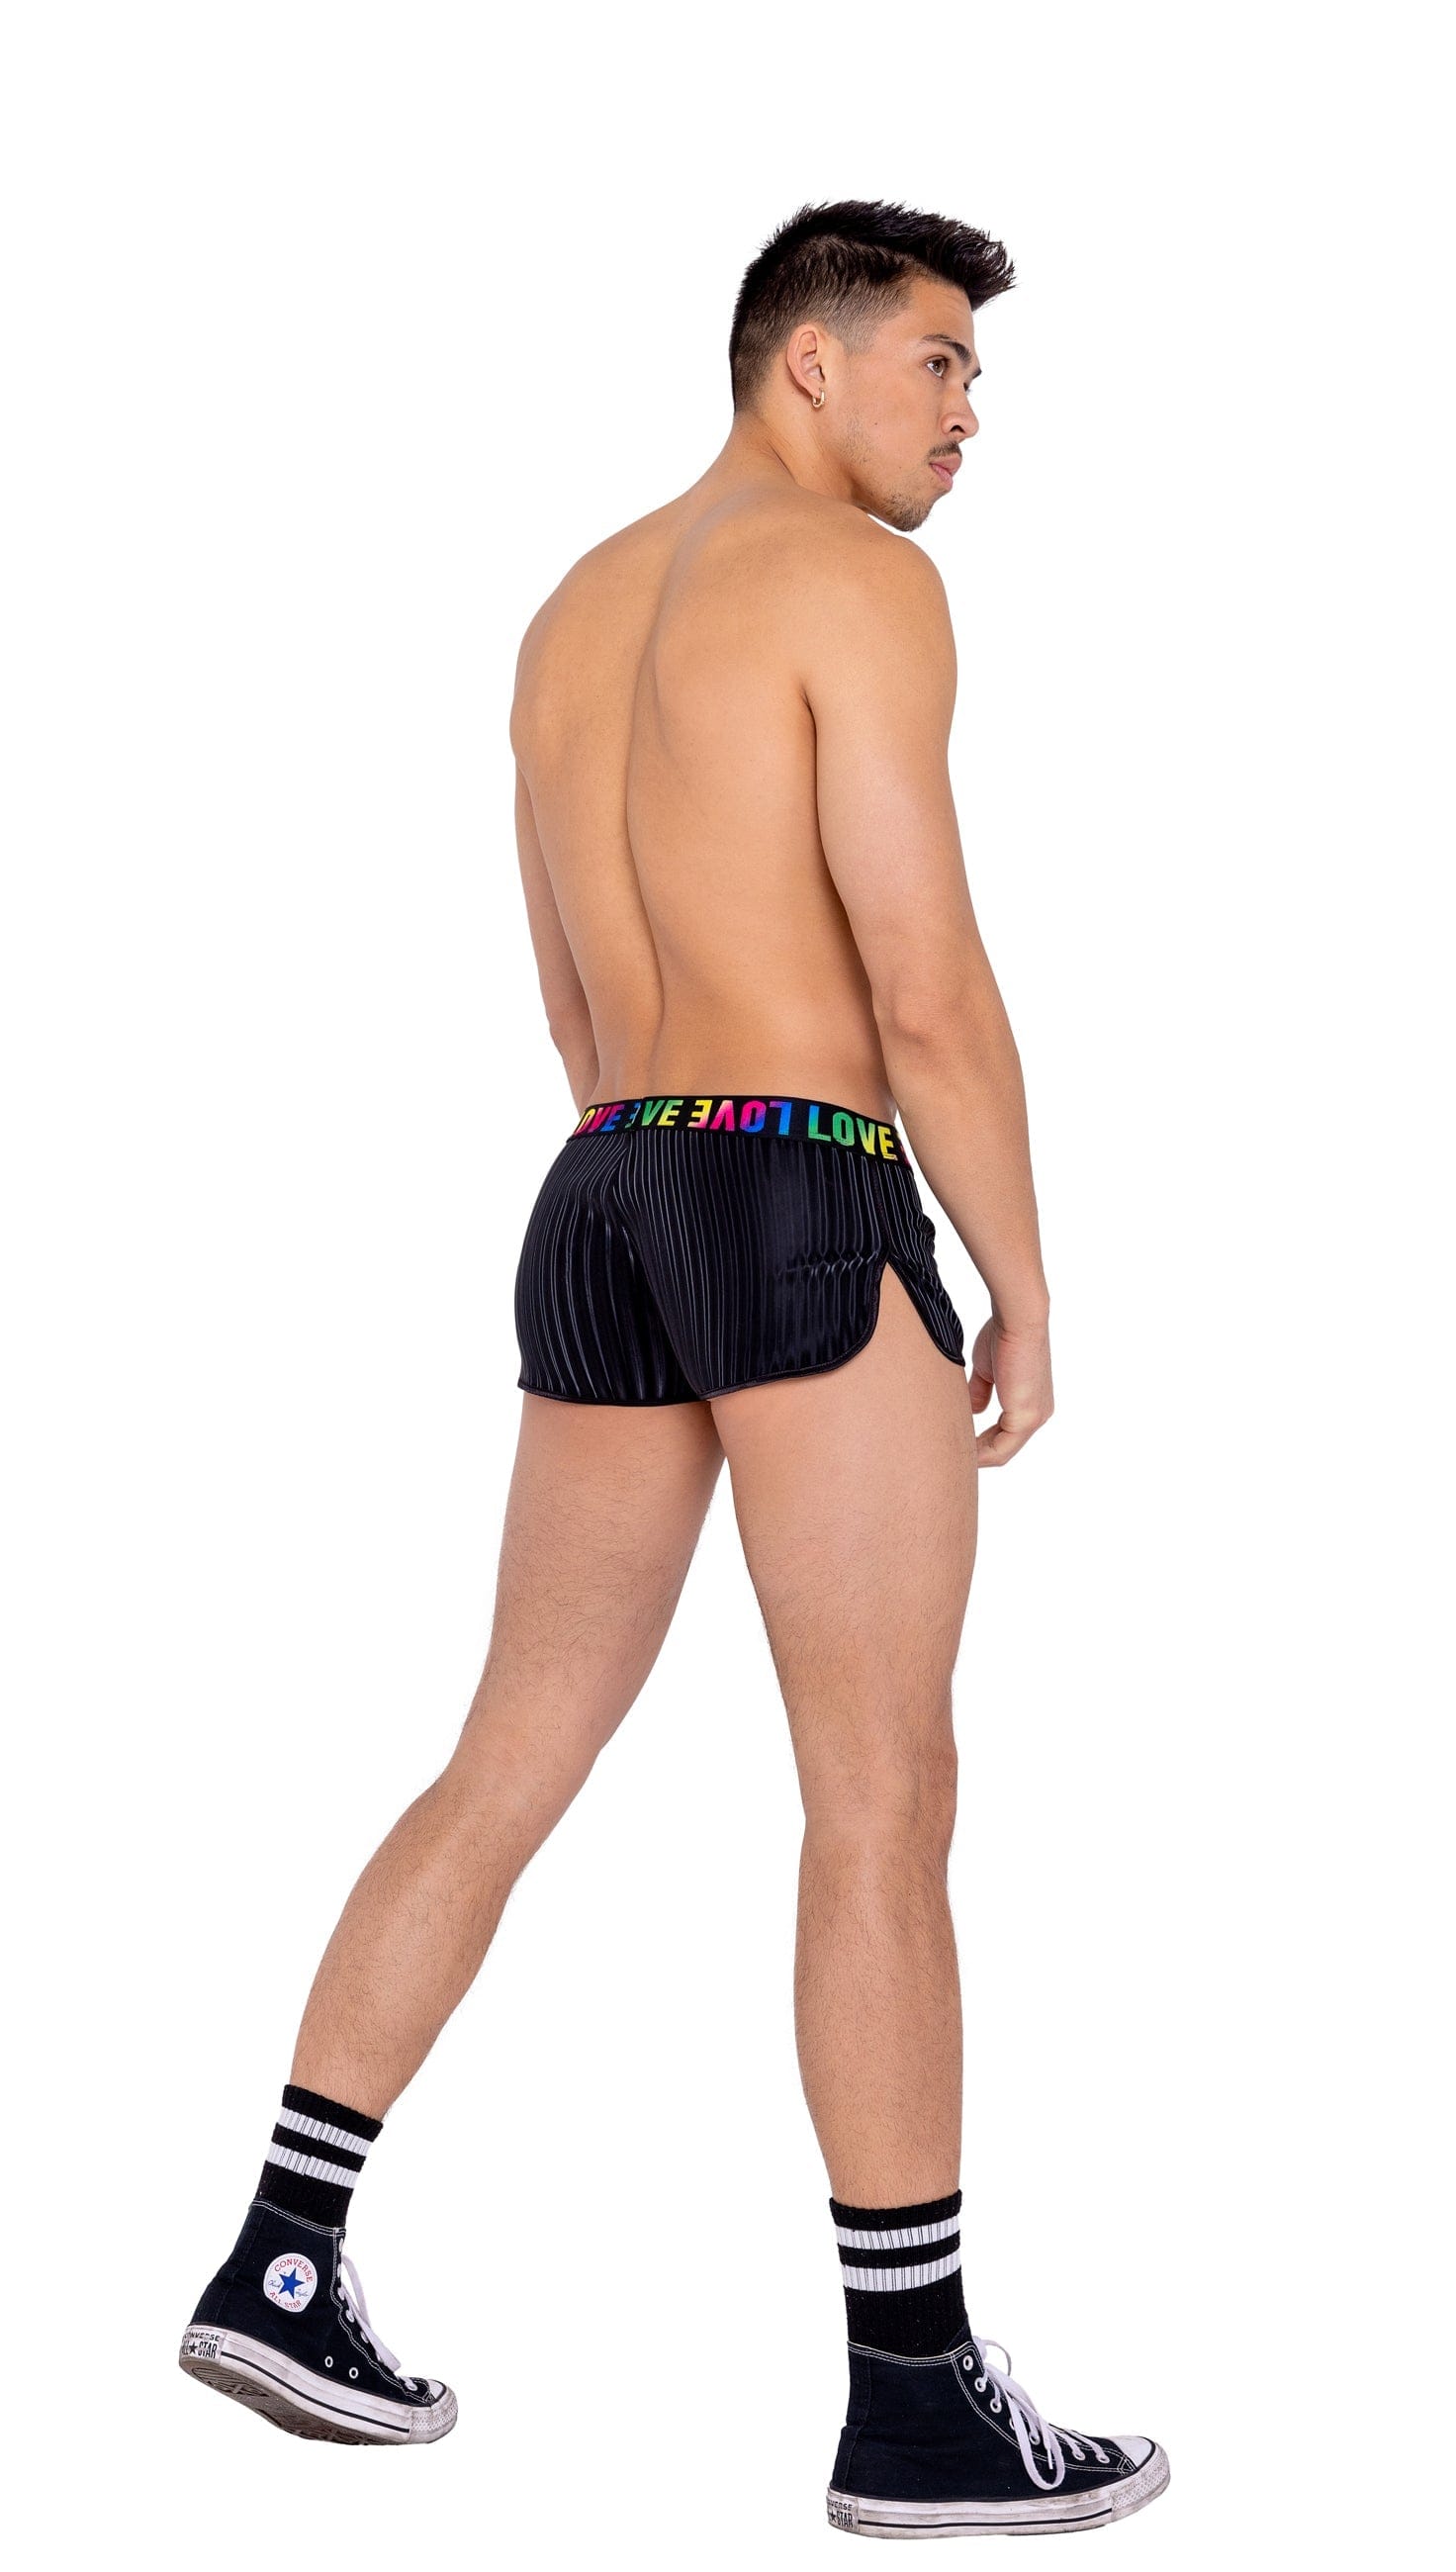 Roma Black Men’s Pride w/ LOVE Elastic Band Runner Shorts 2022 Black Men’s Pride Attached Garters Chain Detail Thong Ravewear Apparel & Accessories > Clothing > Shirts & Tops